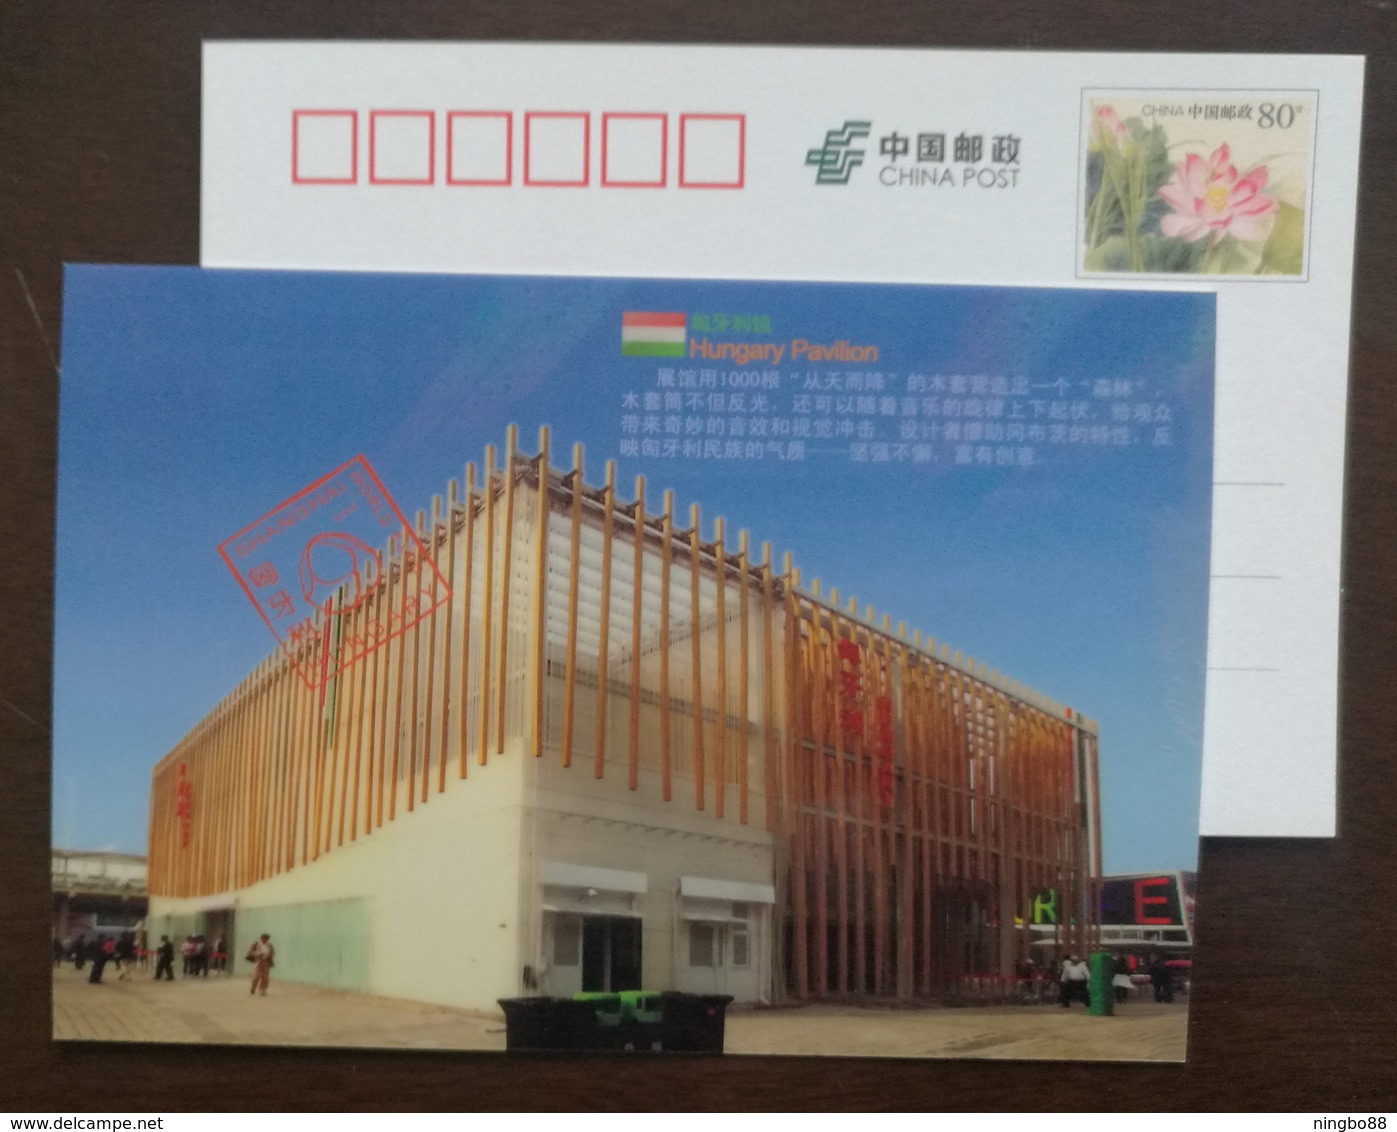 Hungary Pavilion Architecture,China 2010 Expo 2010 Shanghai World Exposition Advertising Pre-stamped Card - 2010 – Shanghai (Chine)